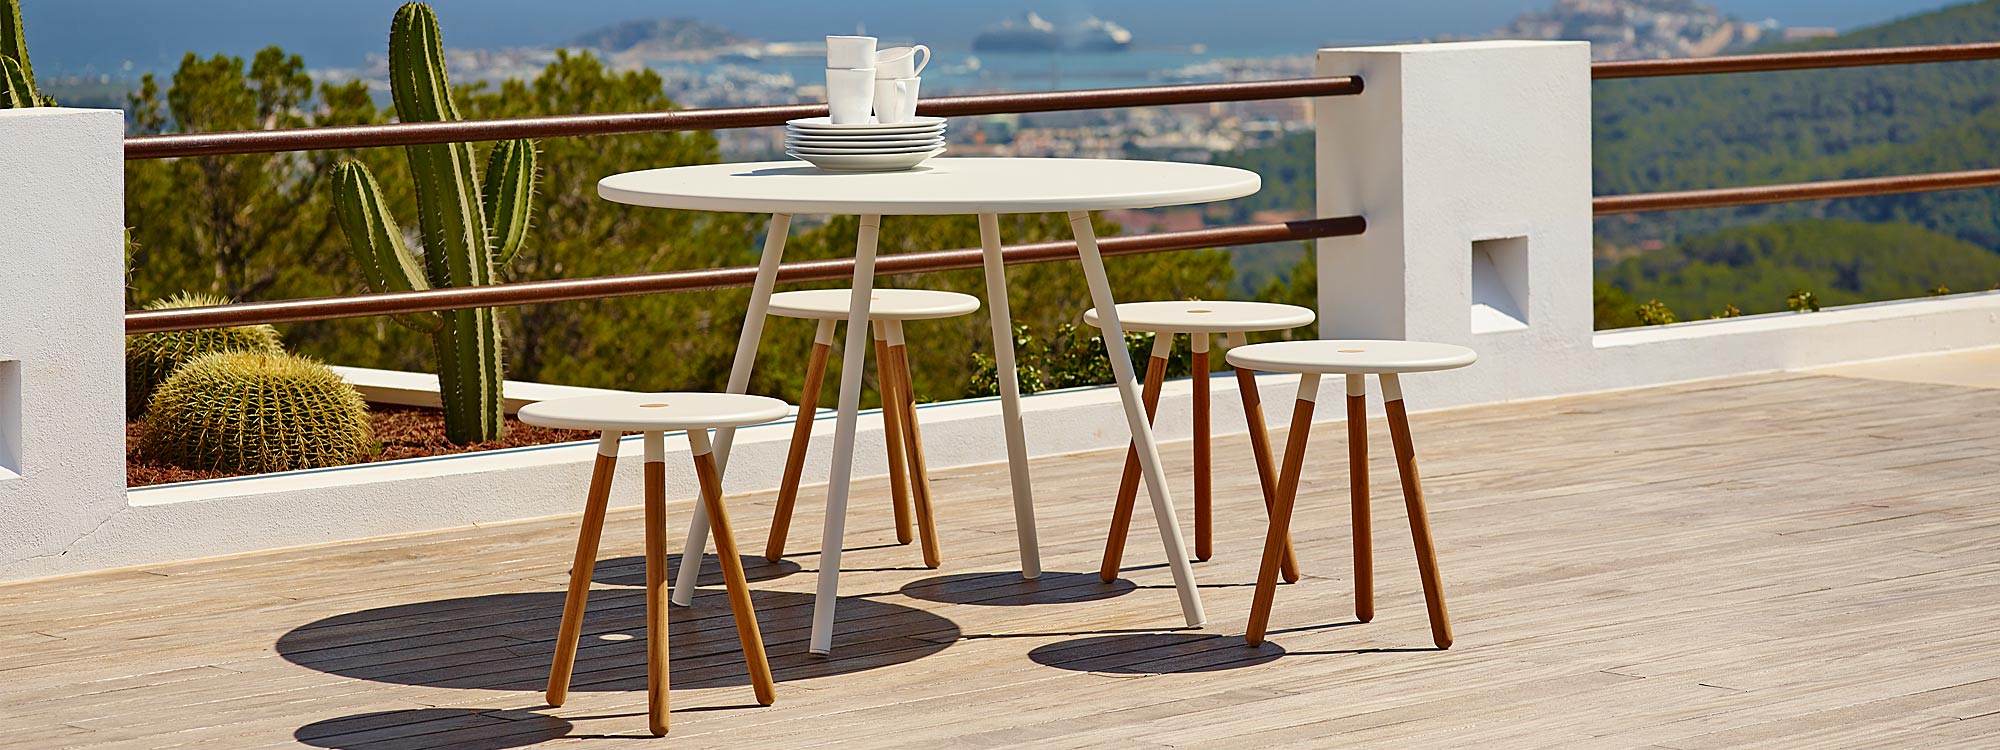 Image of Caneline Area round garden table and stools in white aluminum and teak, shown on terrace with cactuses and port in the background